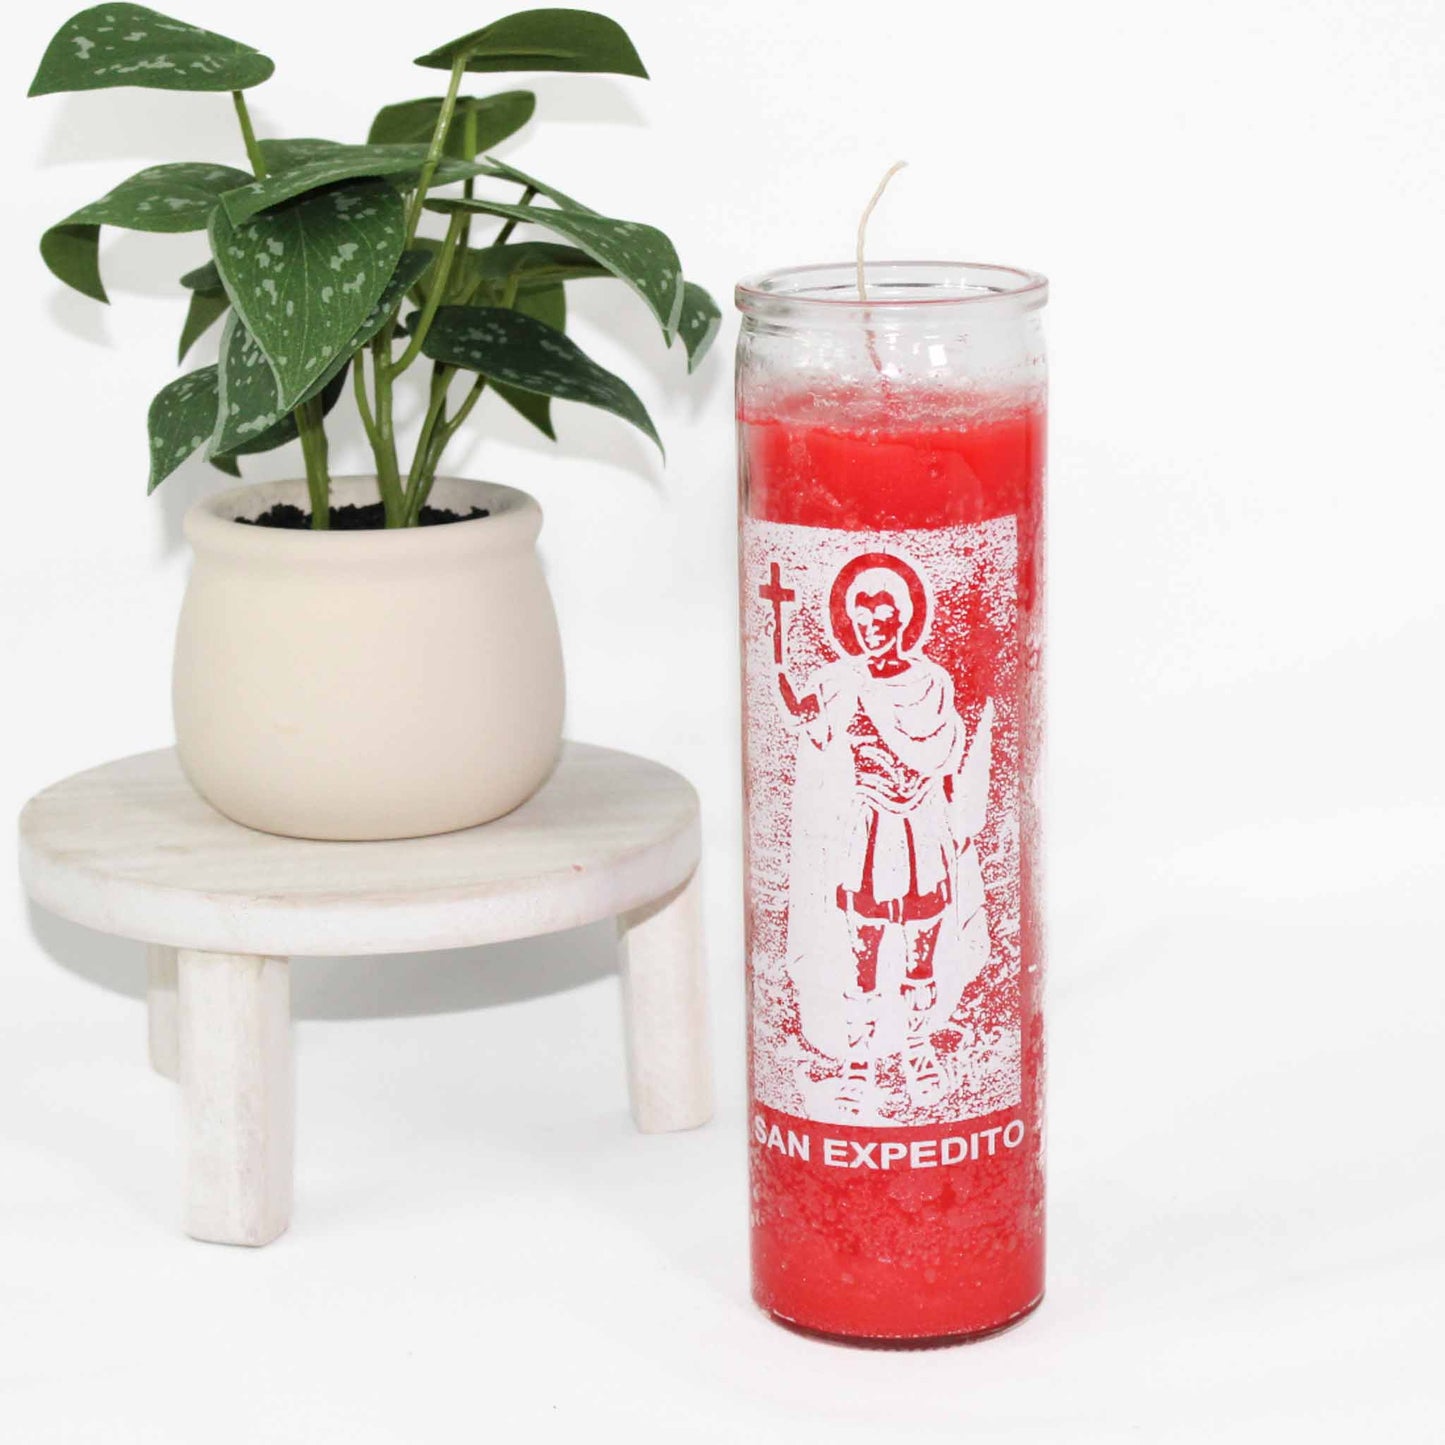 St. Expedite Candle